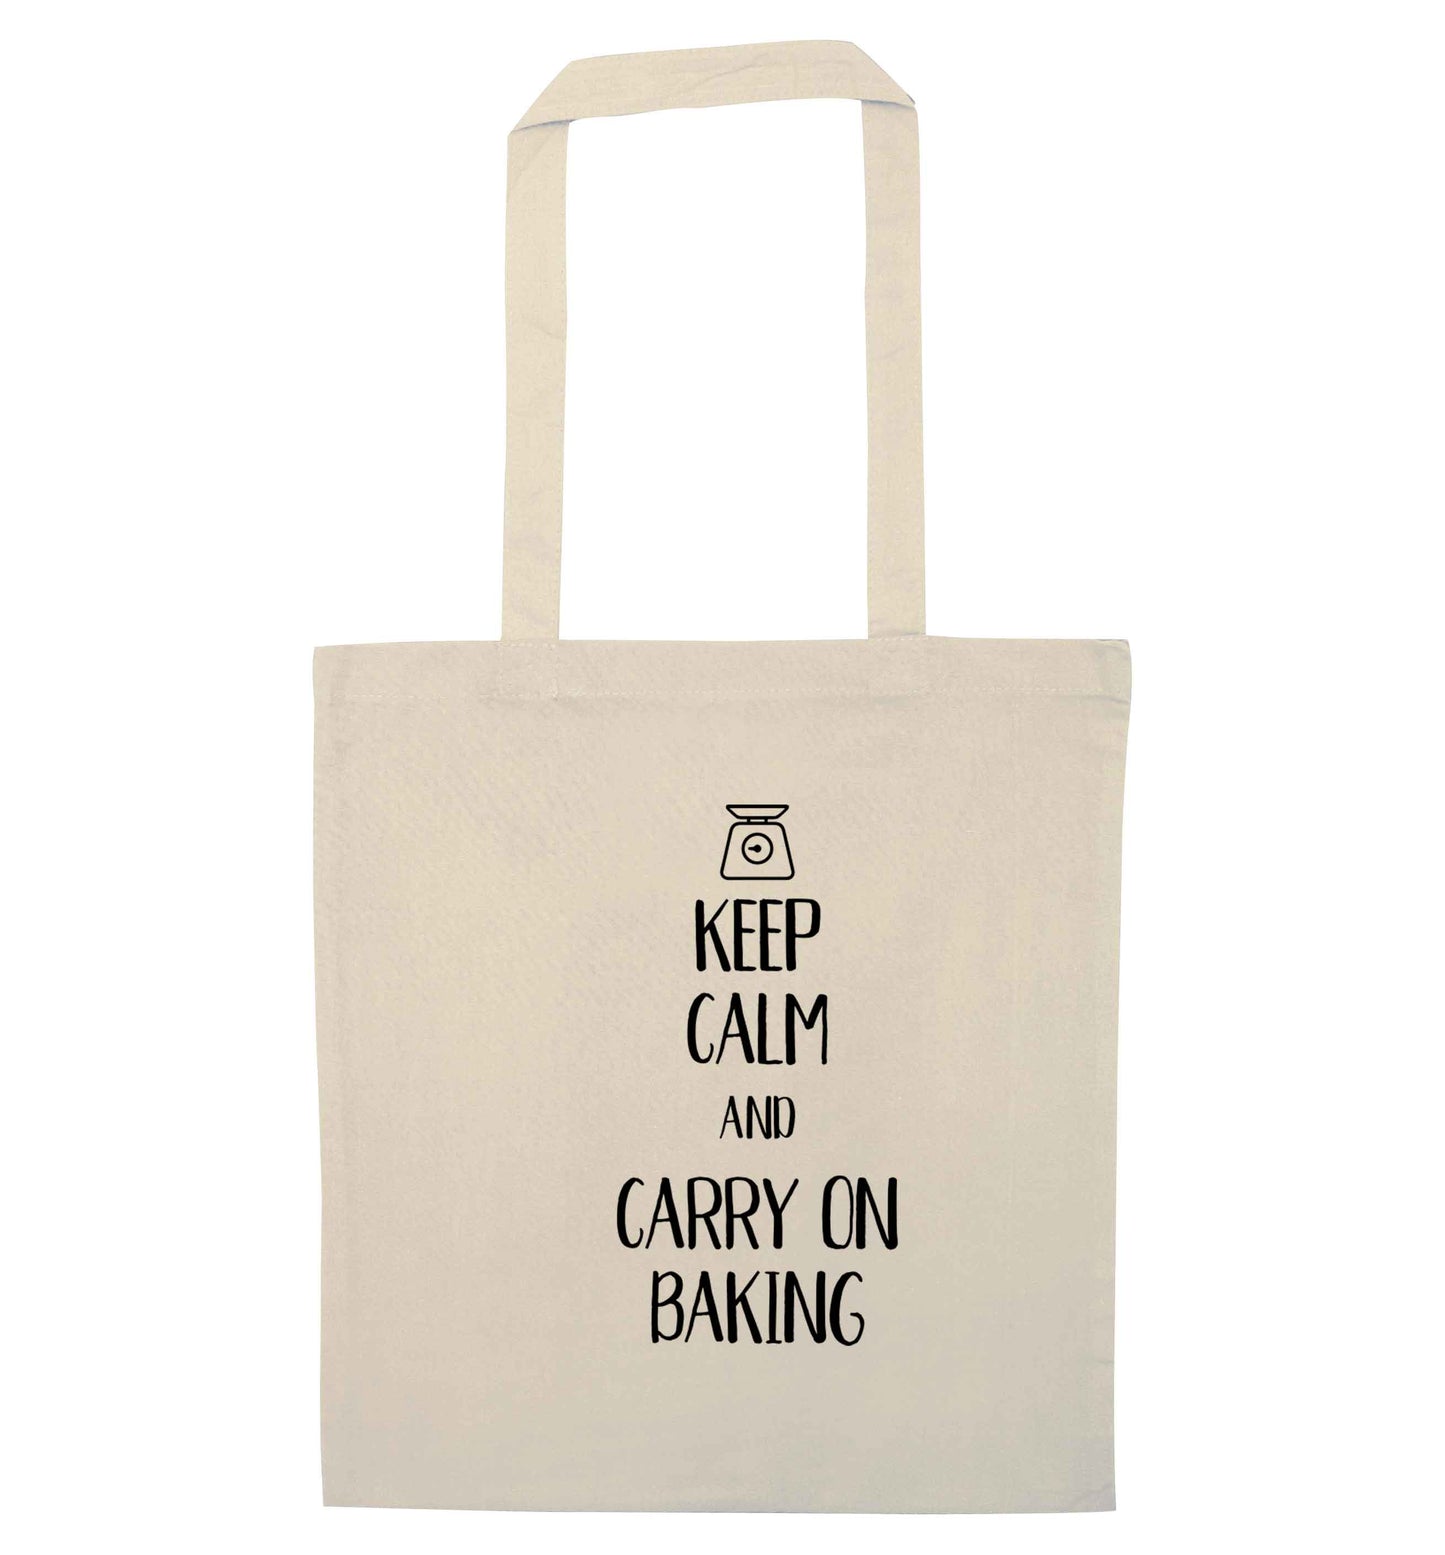 Keep calm and carry on baking natural tote bag